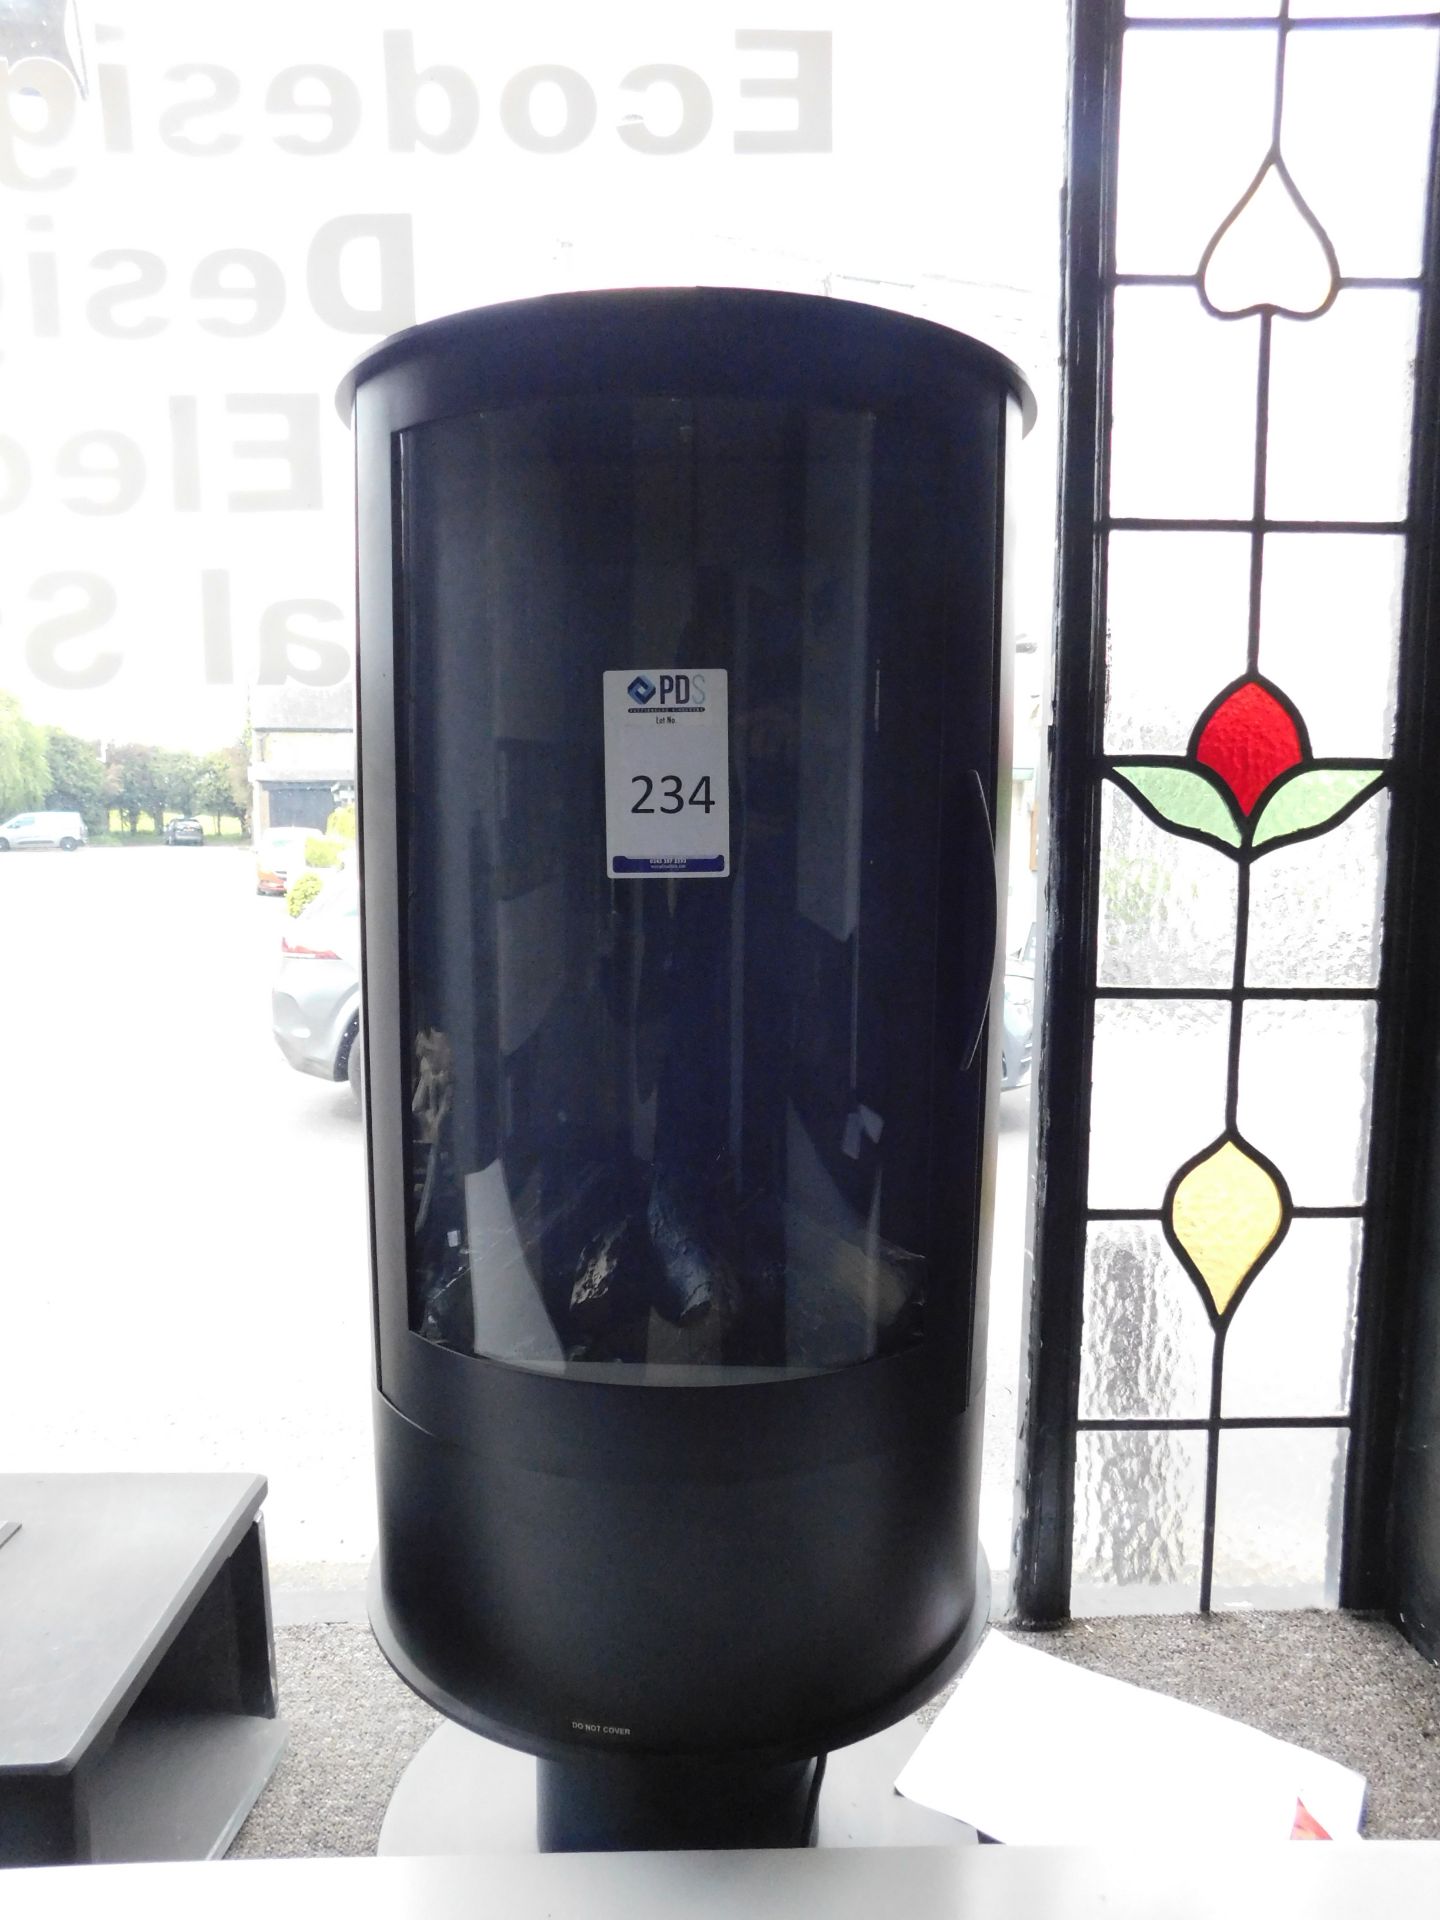 Ex-Display Cylinder Stove with Remote (Where the company’s description/price information is shown in